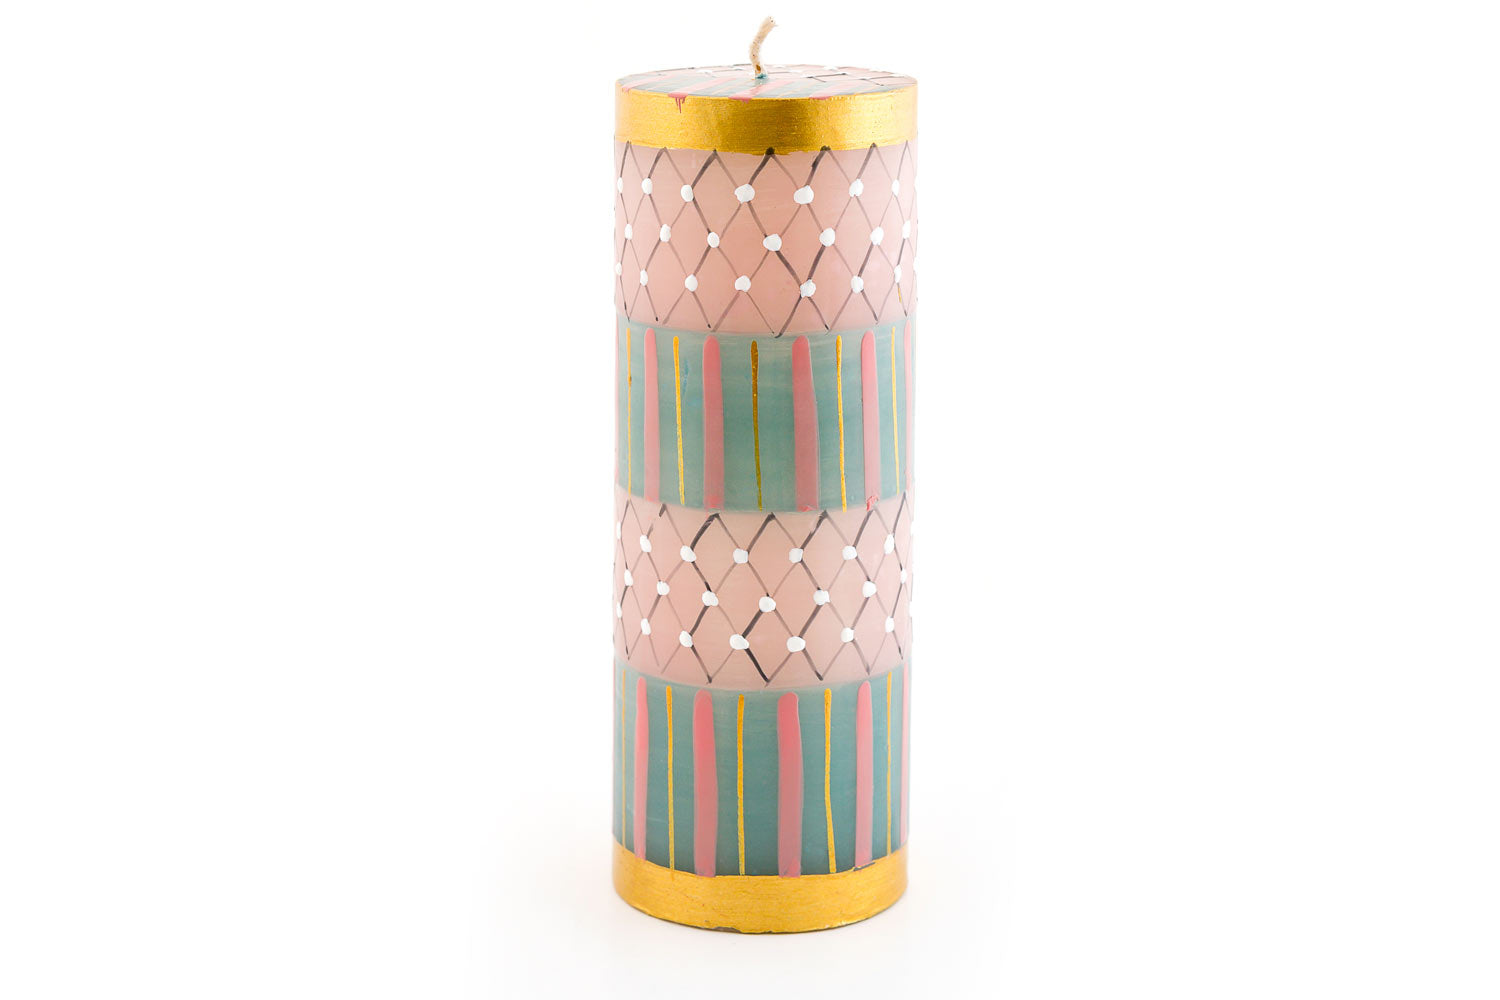 A beautiful Delight 3x8inch pillar candle.  Hand painted with turquoise, pink & gold stripes, with a 'lace looking' pattern made with gold & white.  Hand made. Hand painted. Fair trade.